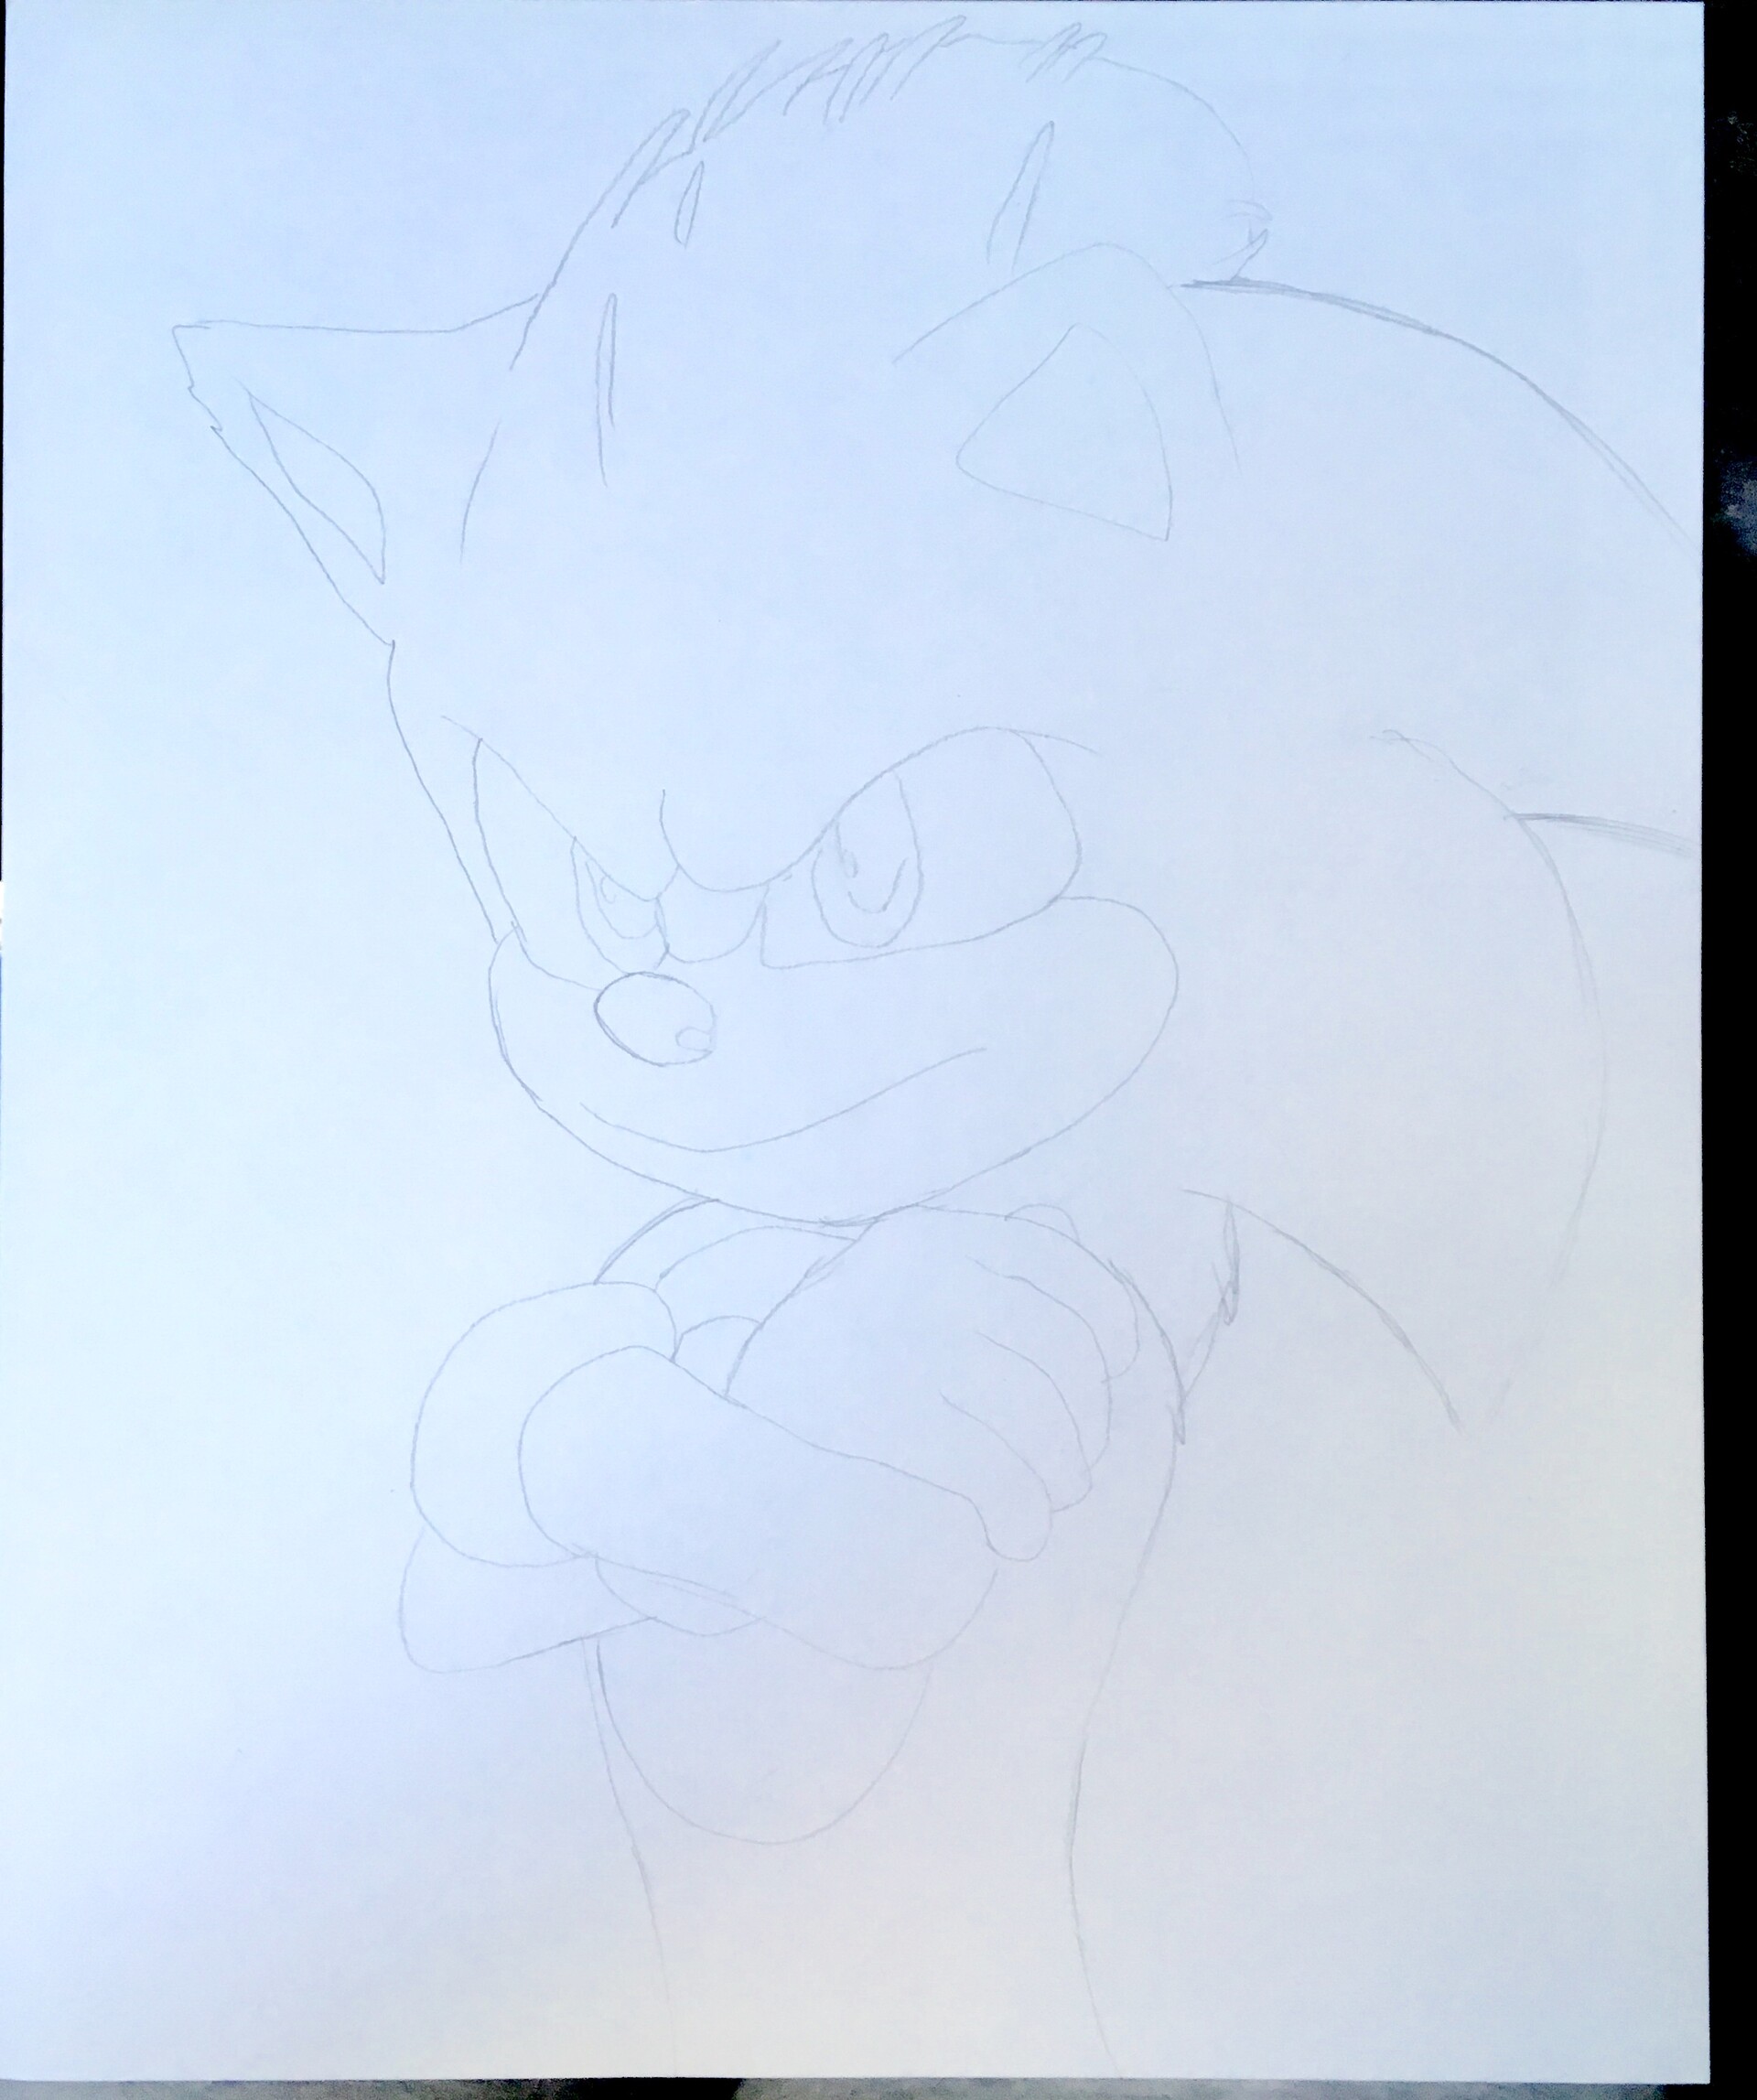 ⚡ How to Draw SONIC the HEDGEHOG ⚡